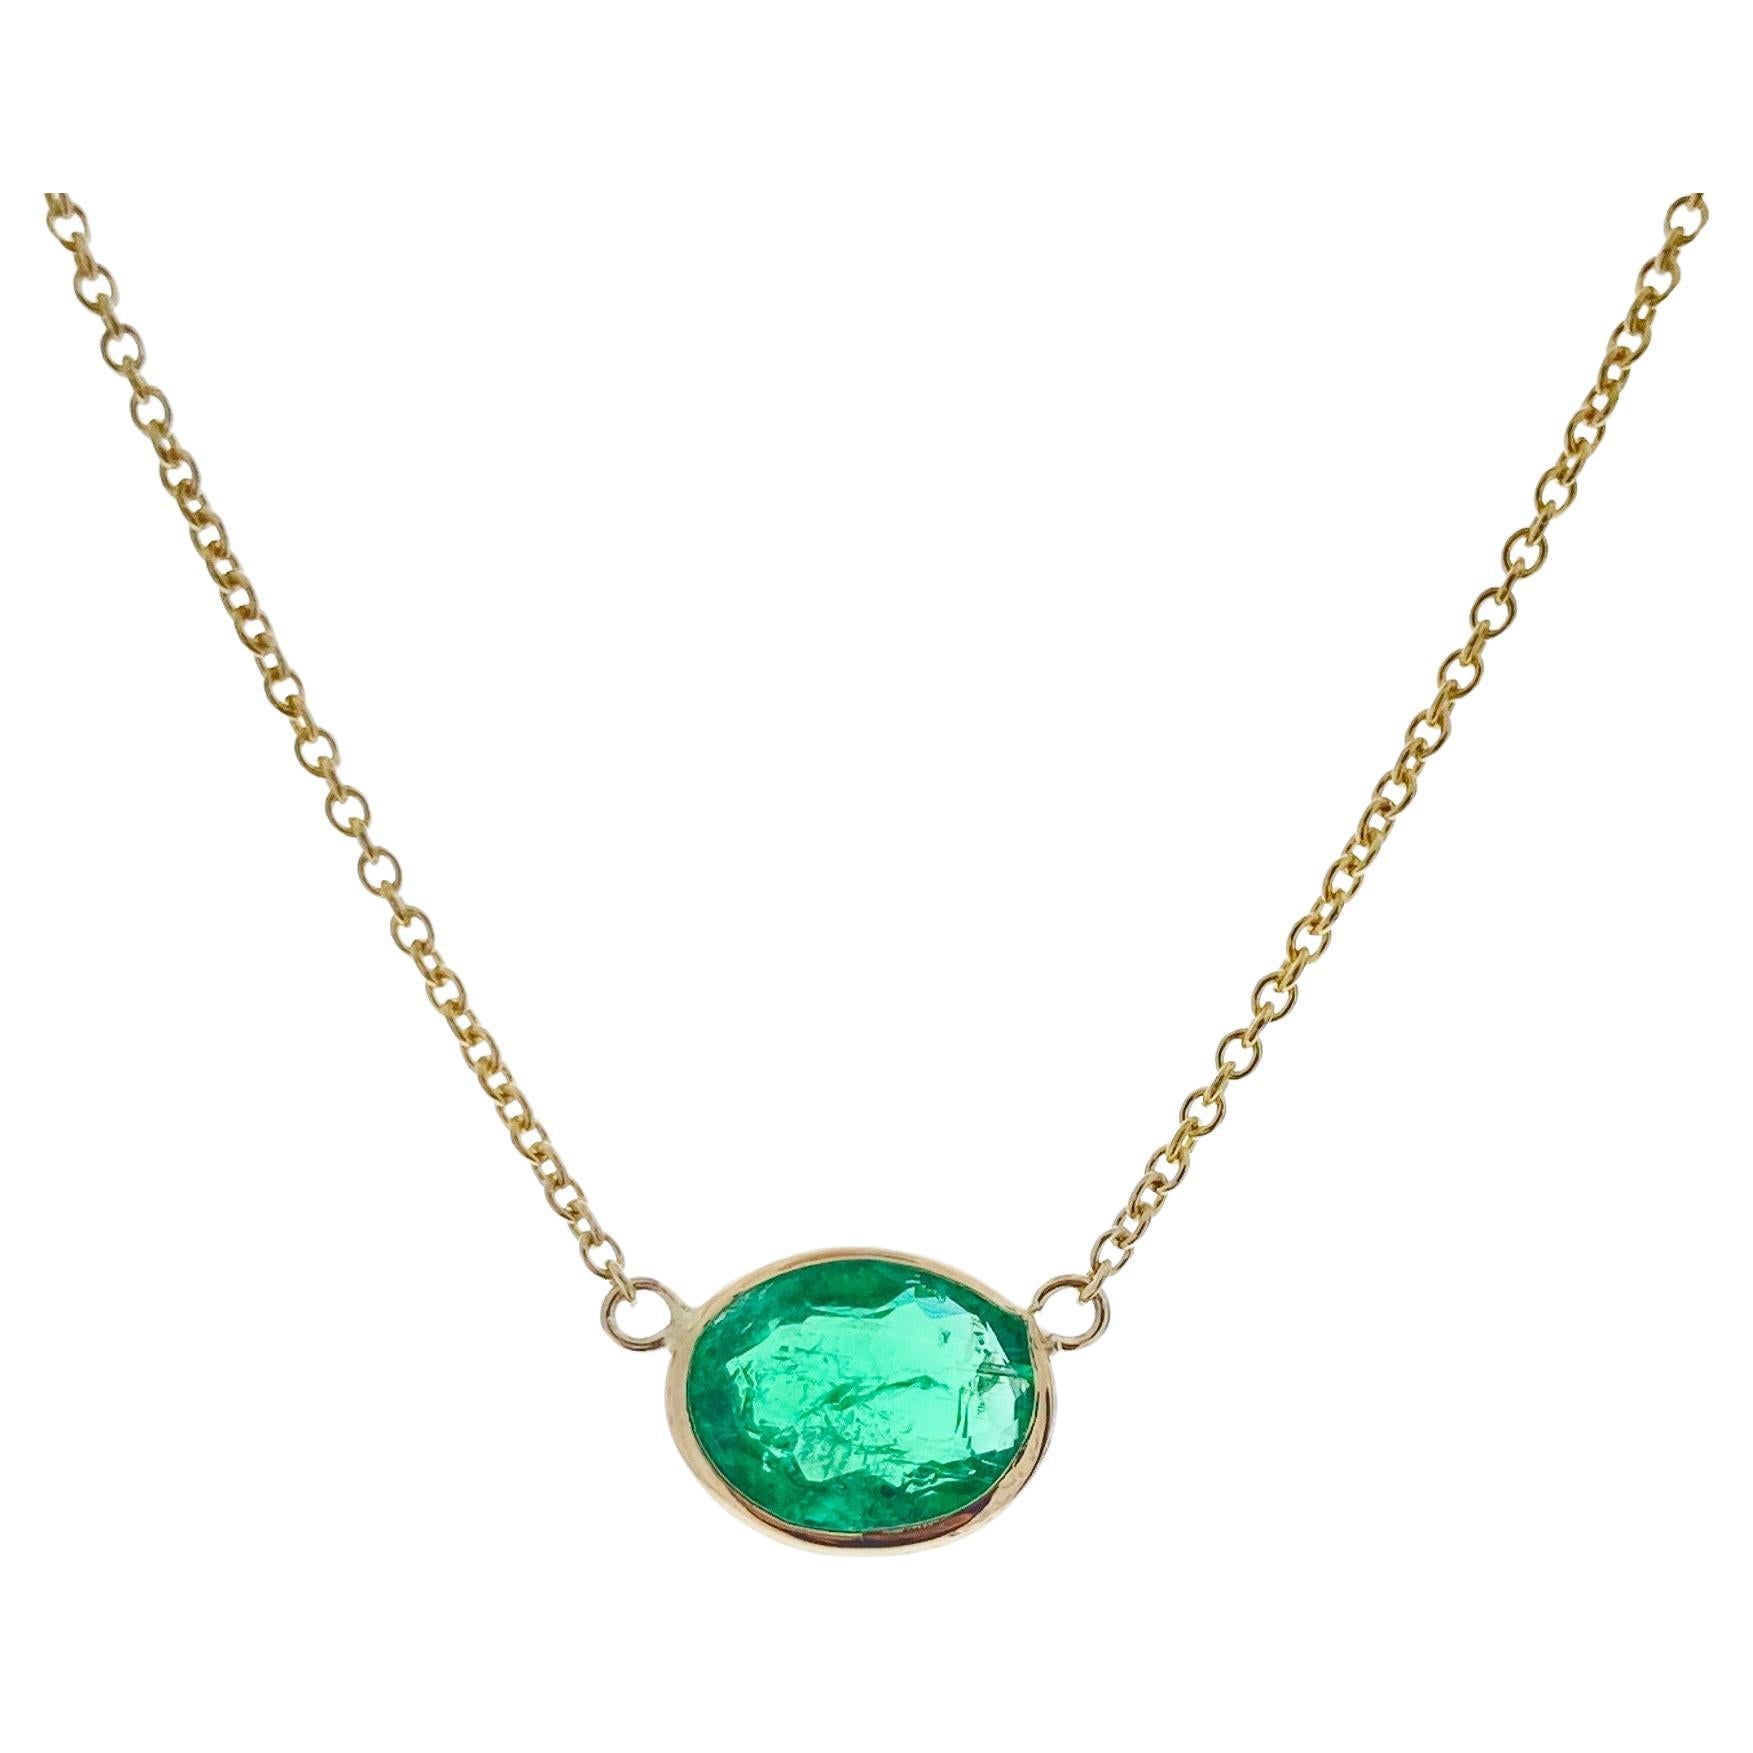 1.96 Carat Green Emerald Oval Cut Fashion Necklaces In 14K Yellow Gold For Sale